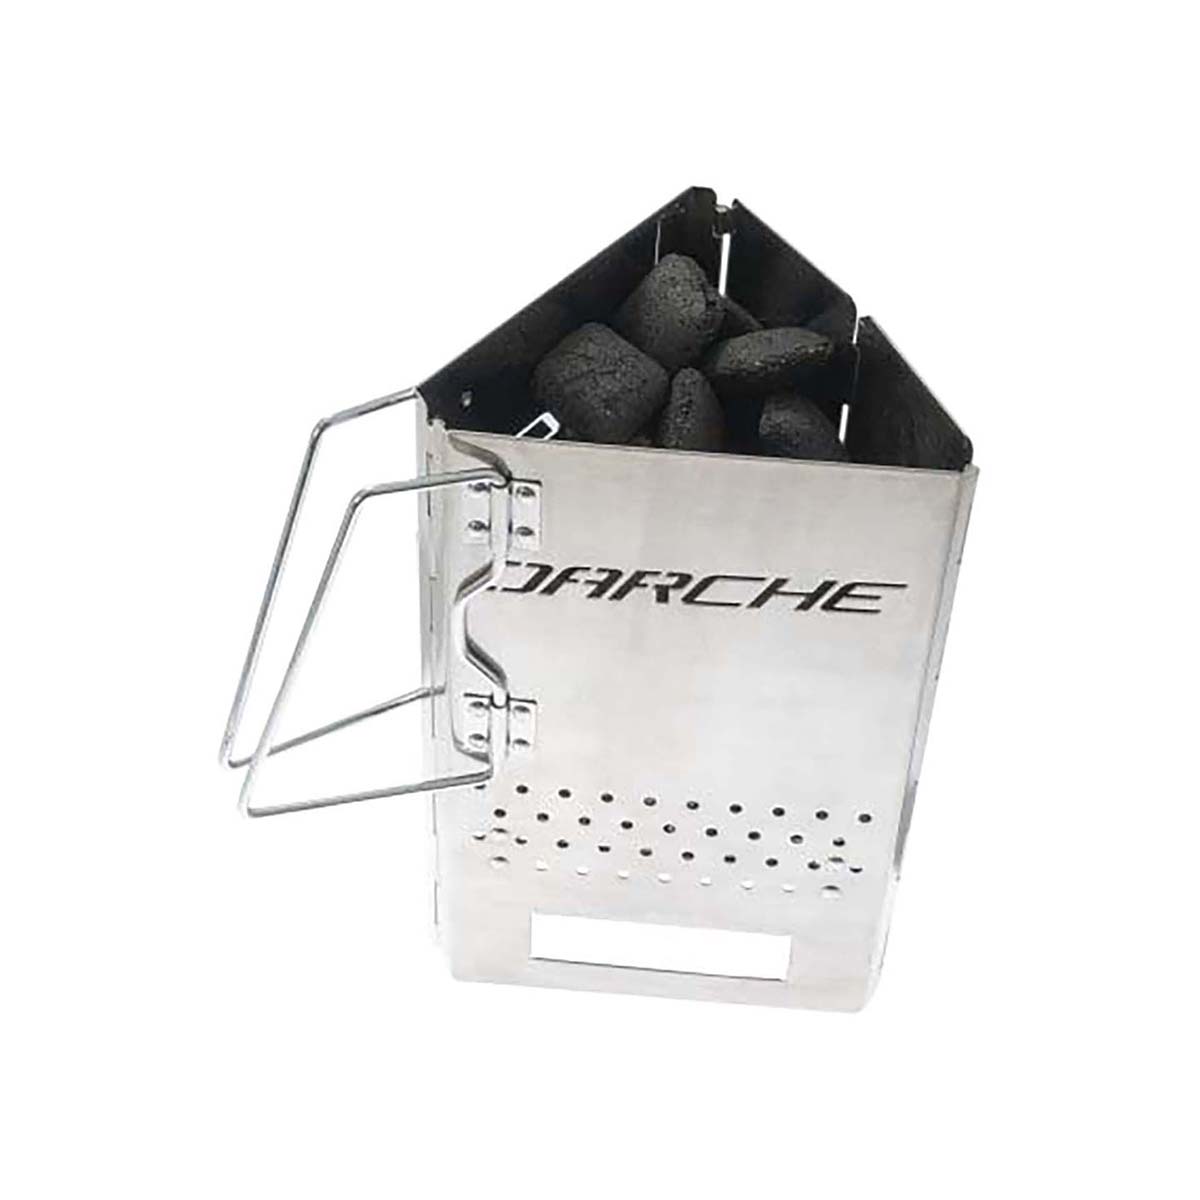 Darche Charcoal BBQ/Fire Pit Starter